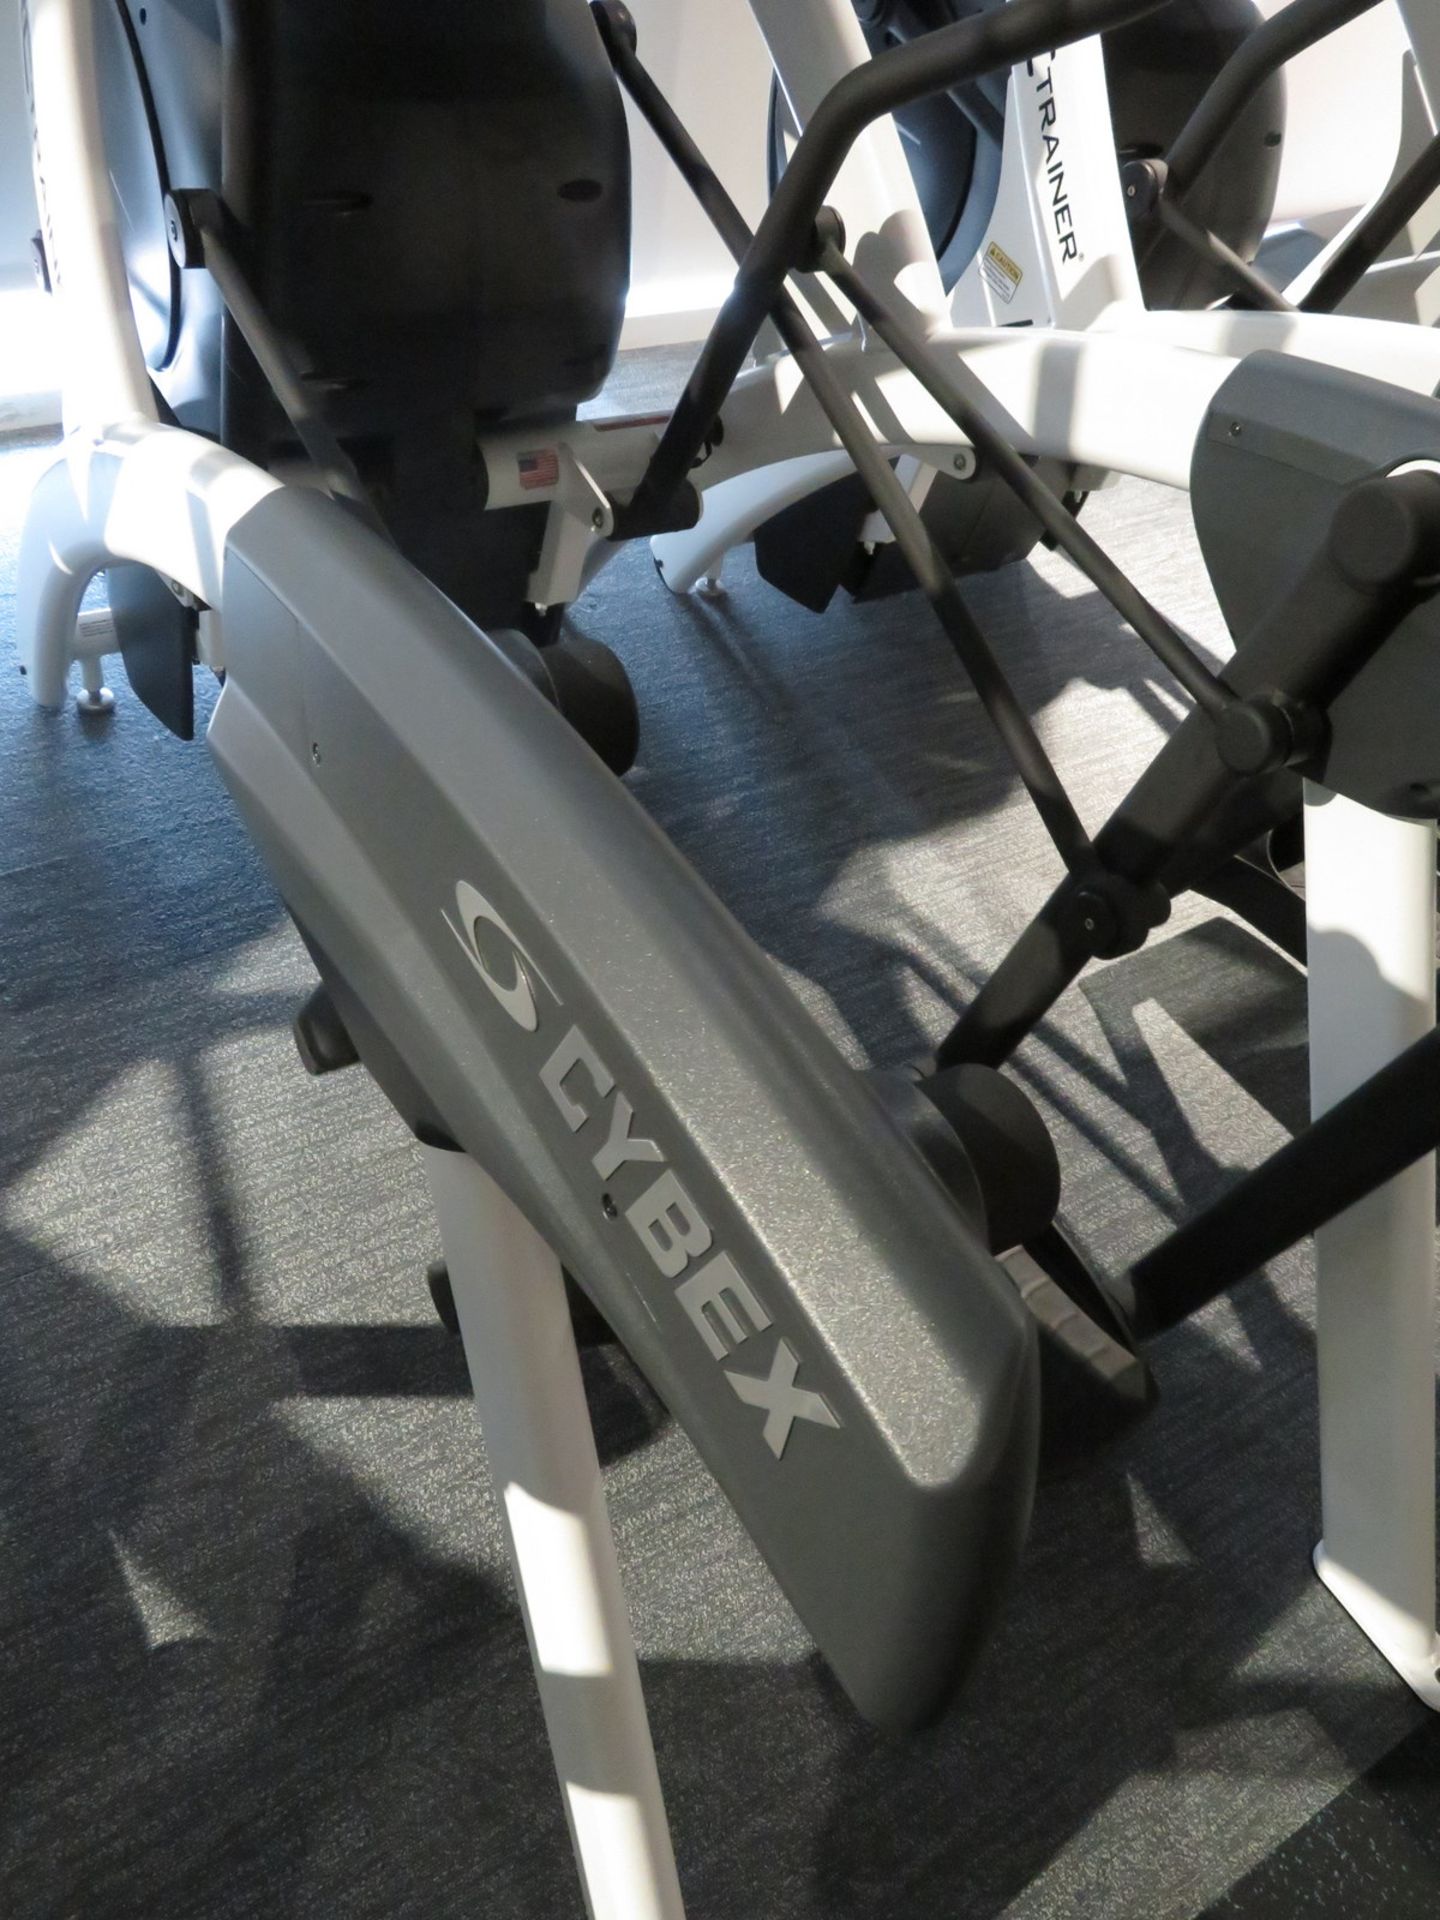 Cybex Arc Trainer Model: 627AT. Working Condition With TV Display Monitor. - Image 7 of 9